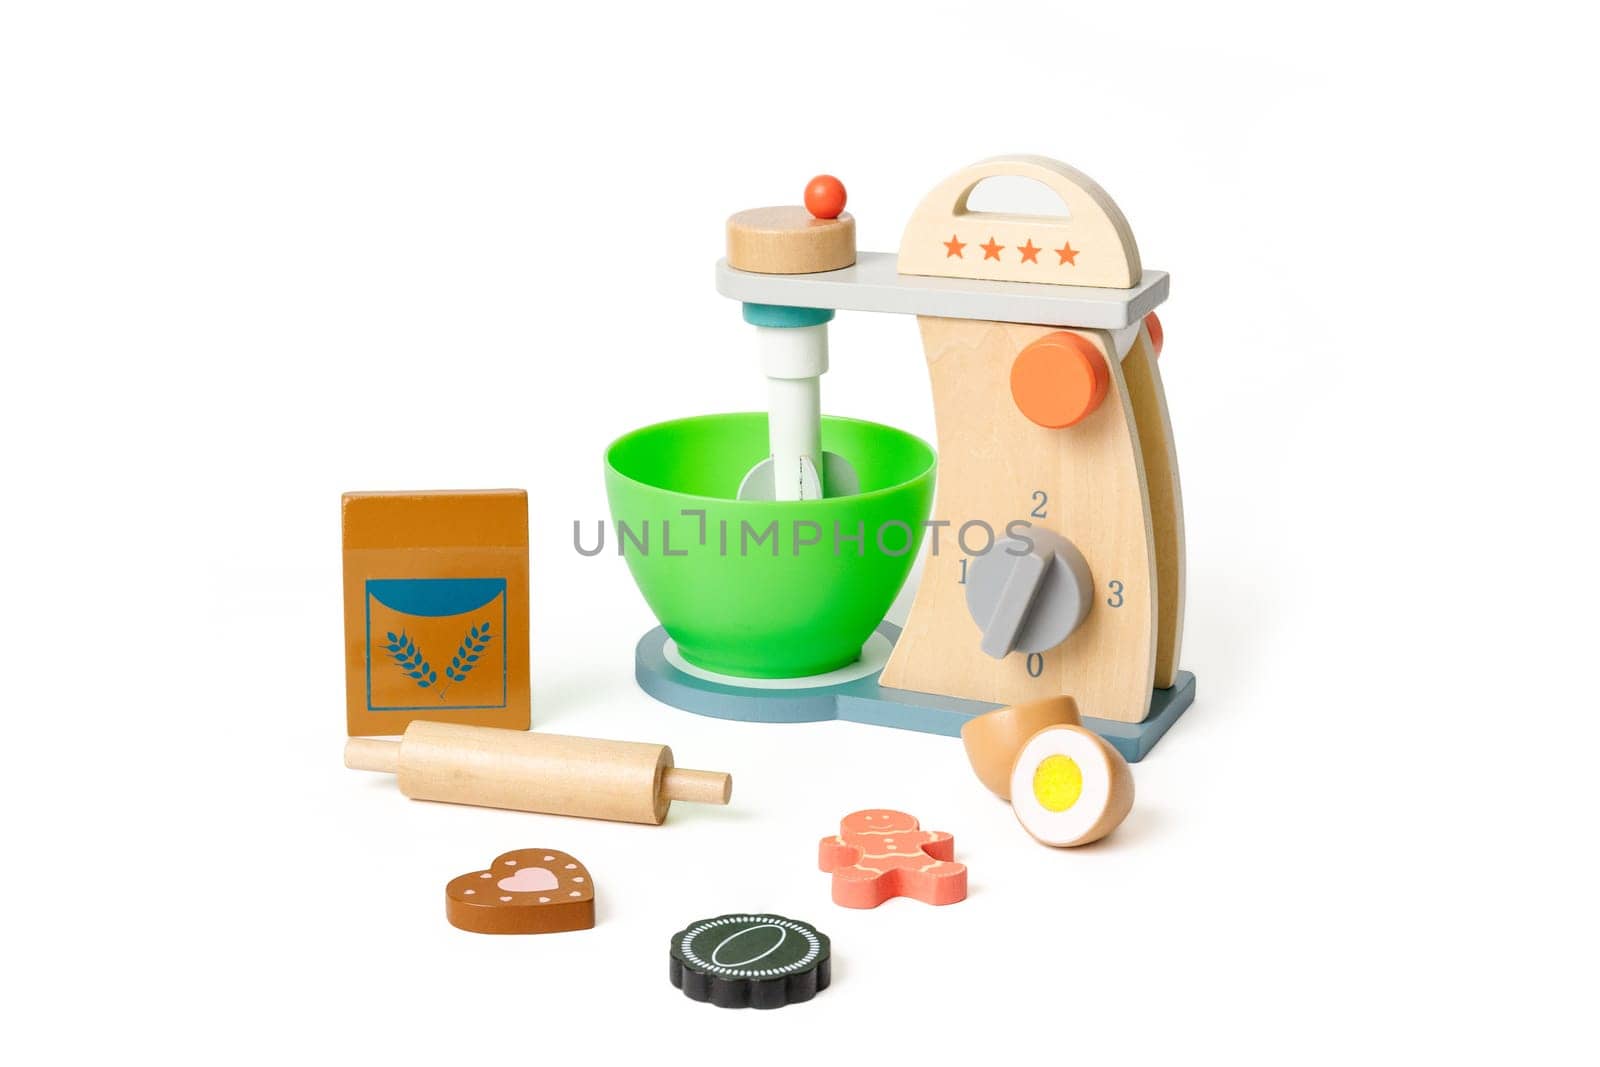 Toy kitchen set with mixer, flour, egg and rolling pin for baking plastic cookies, isolated on white background.